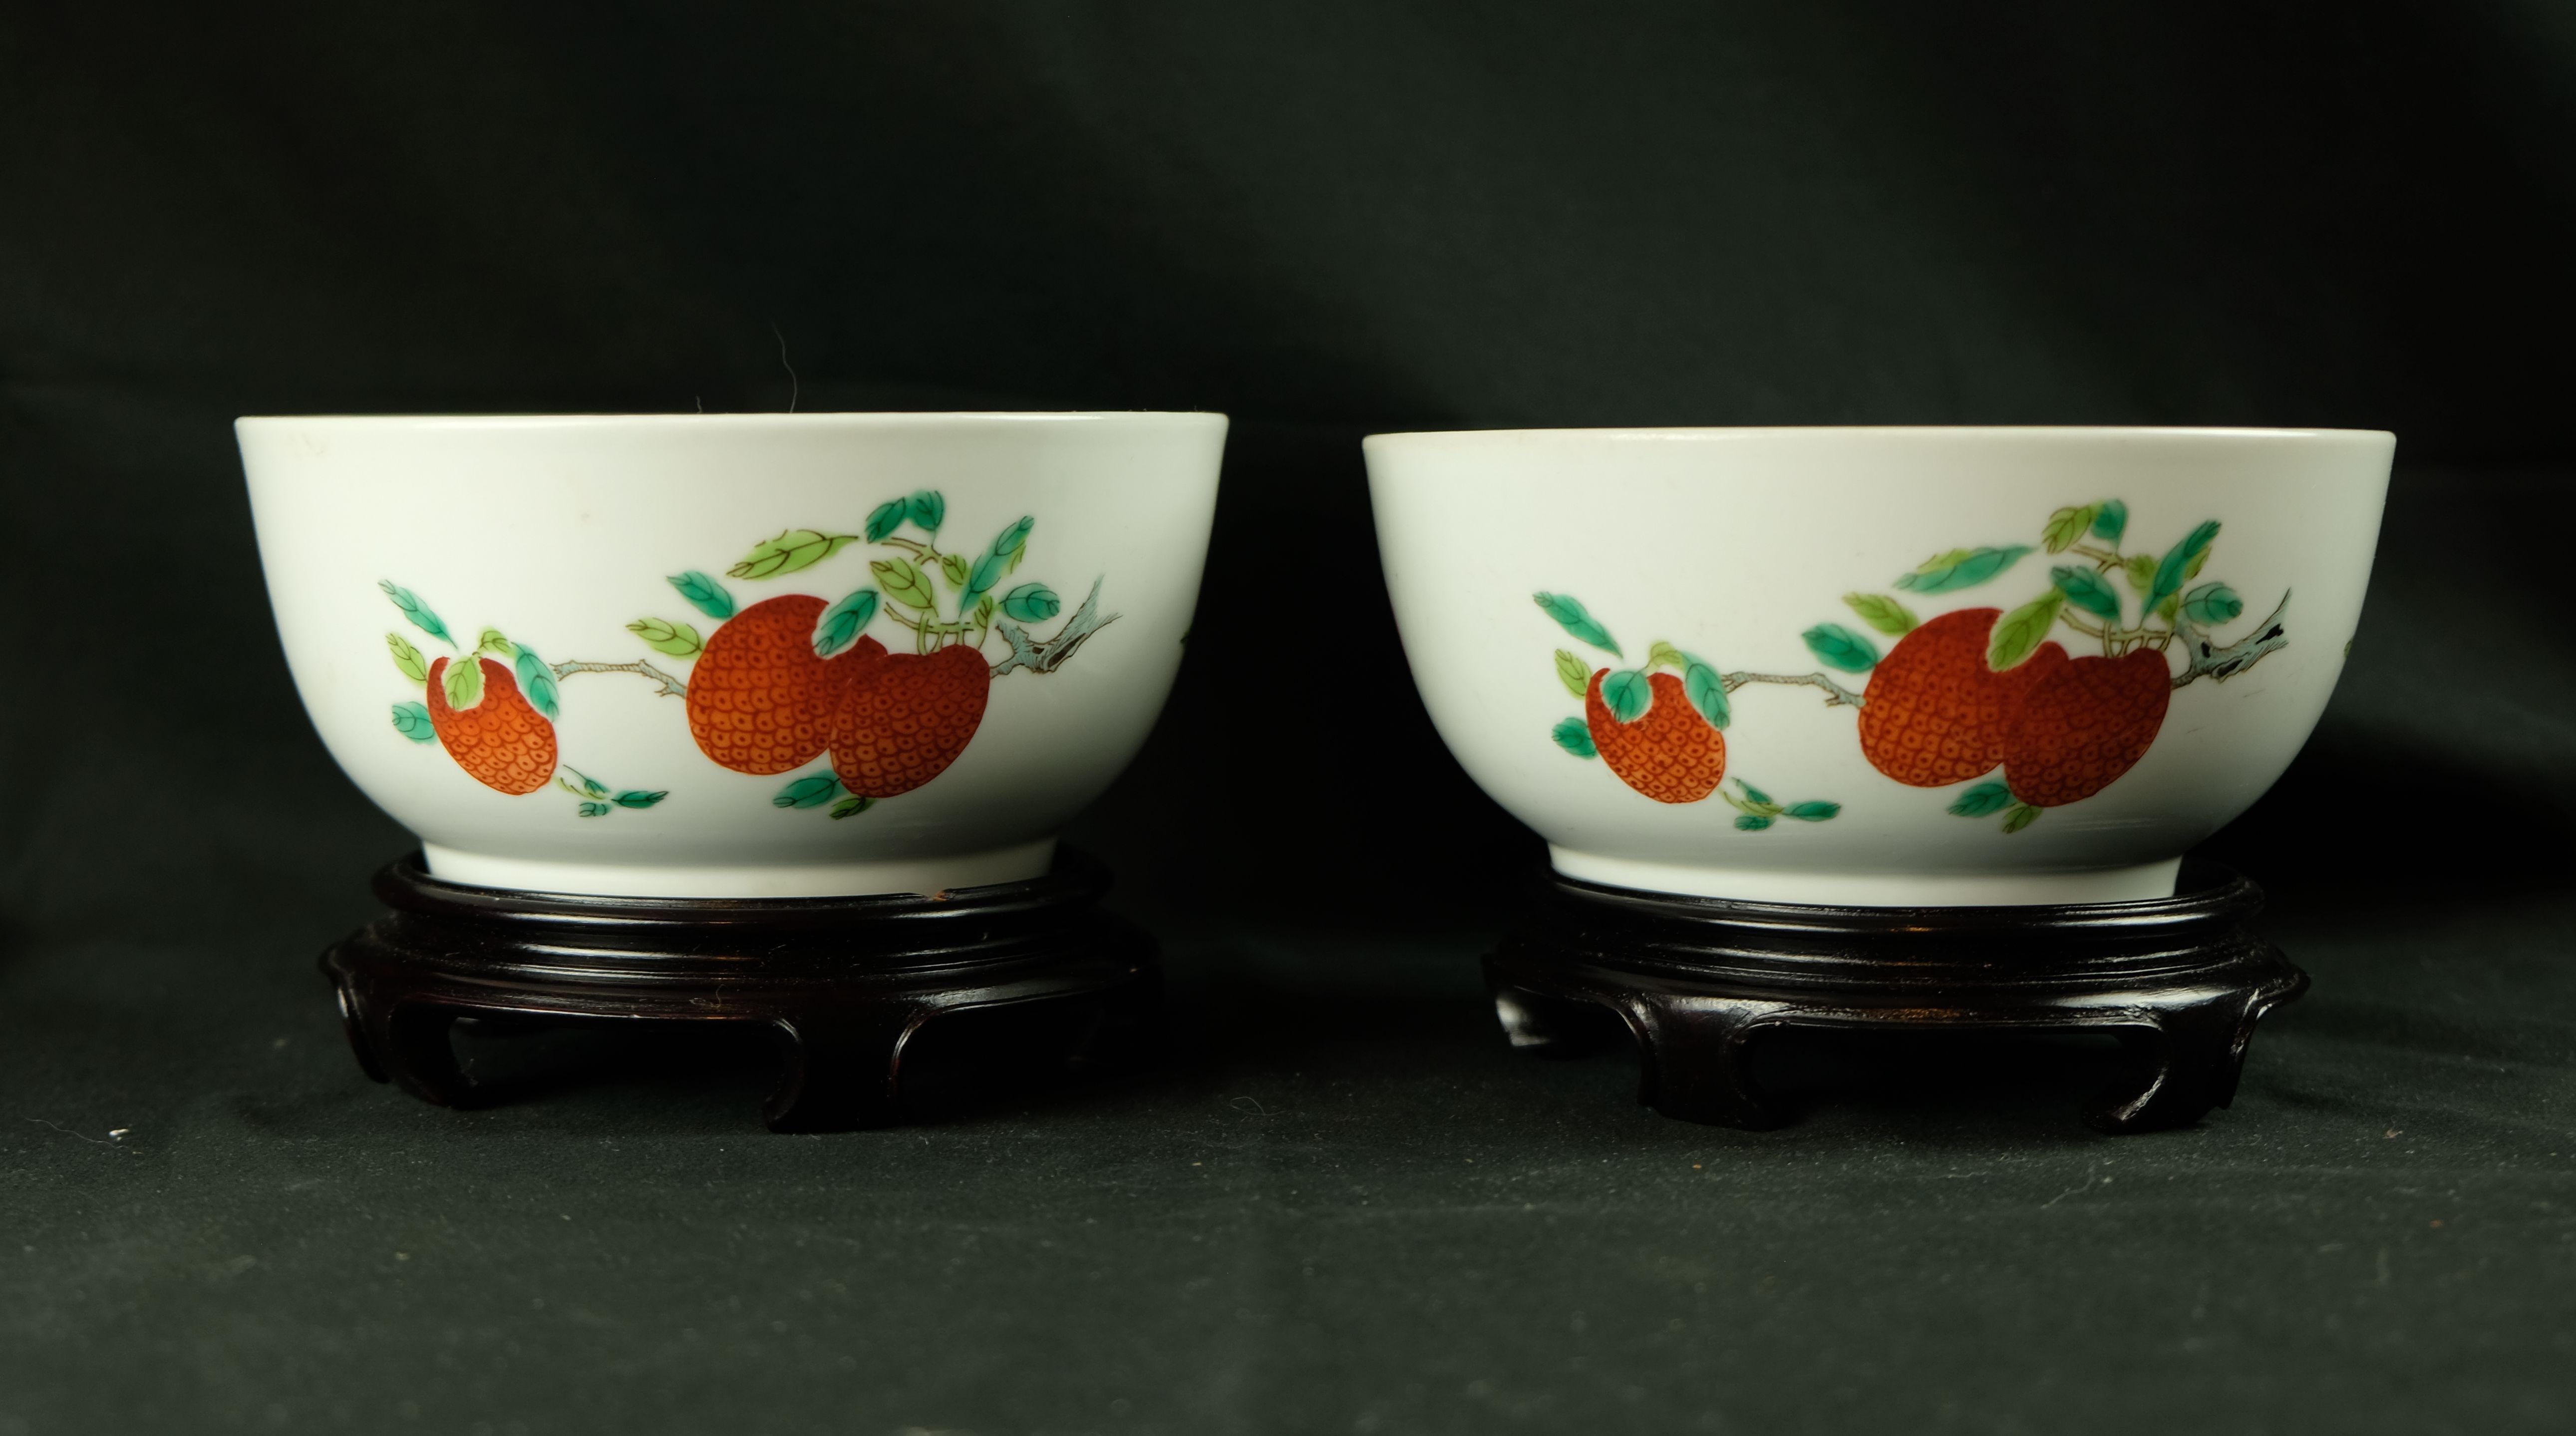 Antique - A Fine Pair of Famille Rose Sanduo bowls 
19th Century

Antique Pair of Famille Rose Sanduo Bowls, 19th Century.
Porcelain bowls, China, are enameled on the exterior with three detached fruiting sprays including lychee, pomegranate,